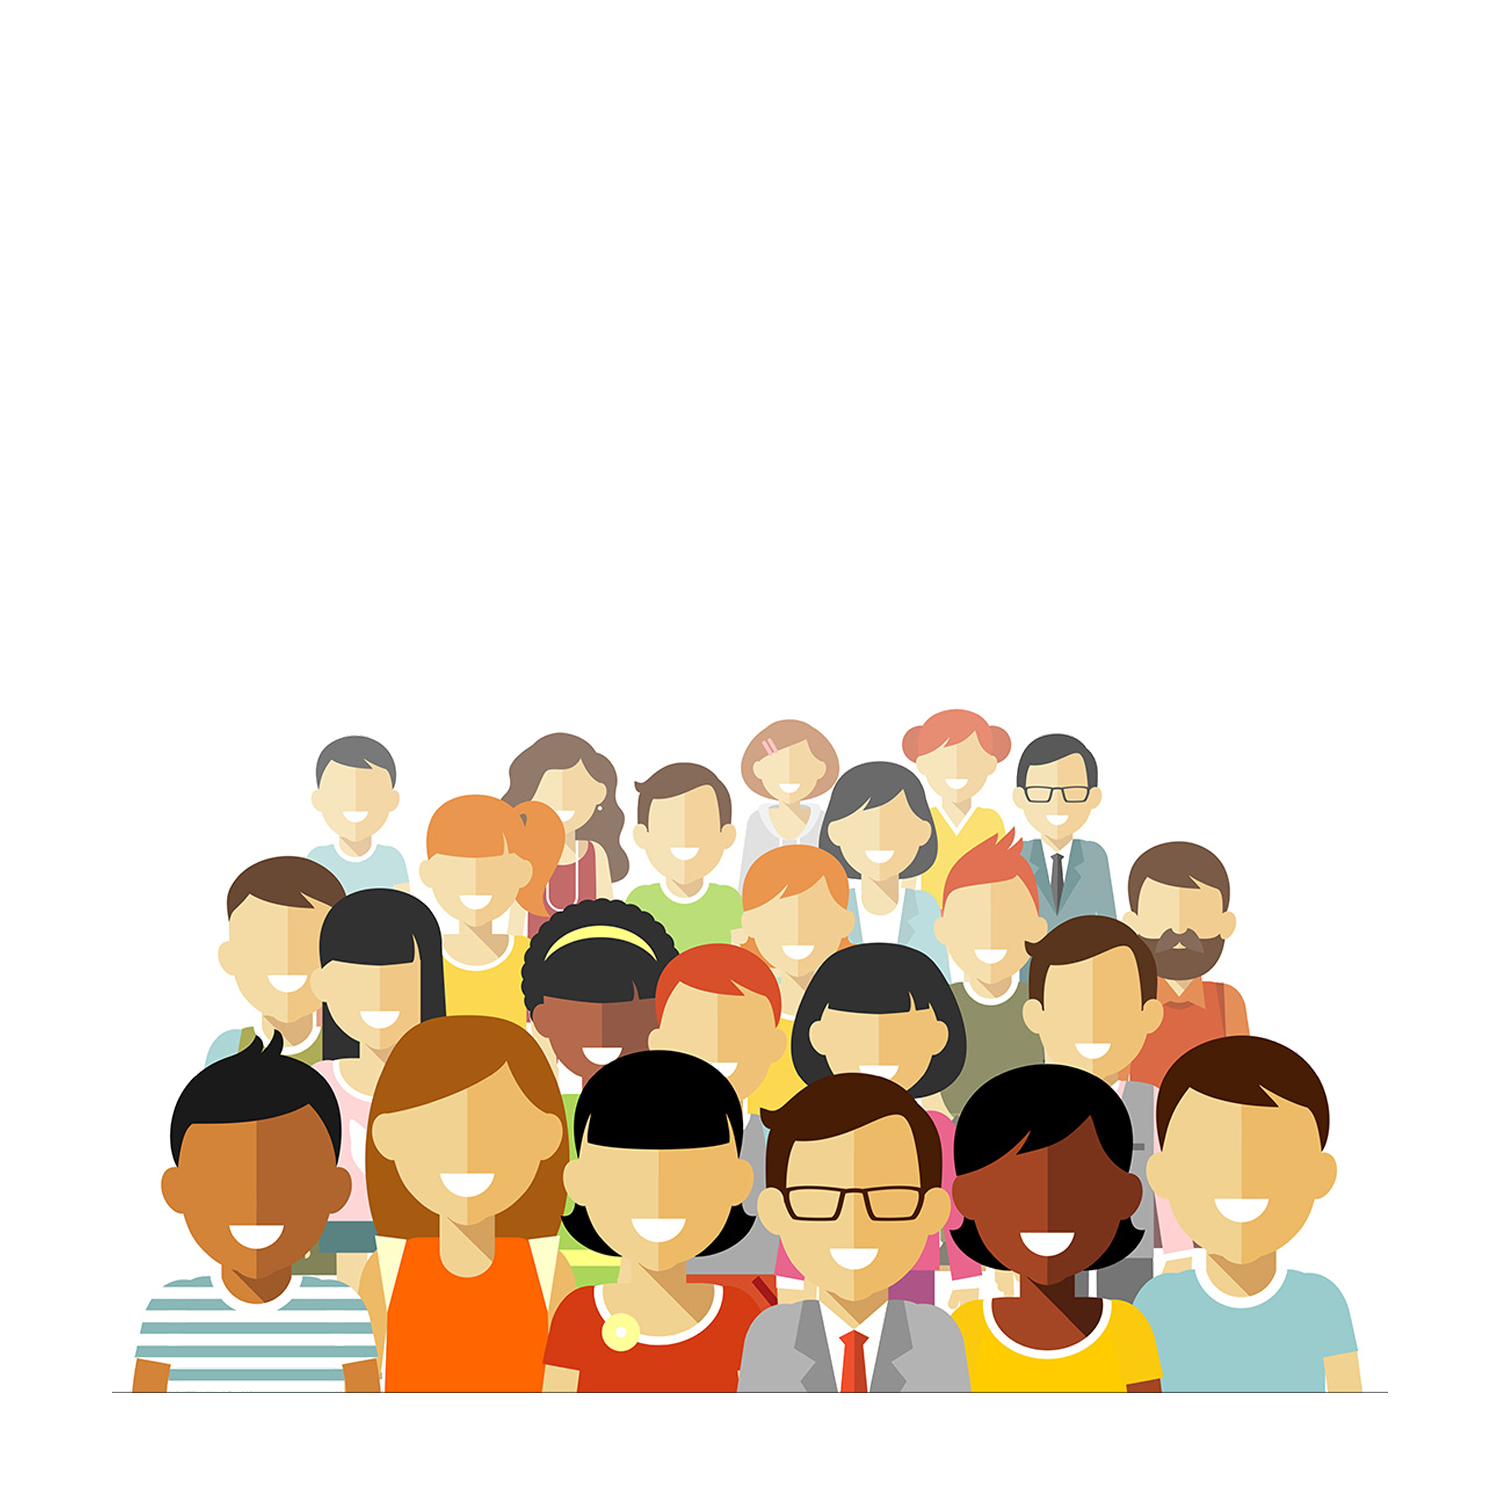 Crowd clipart